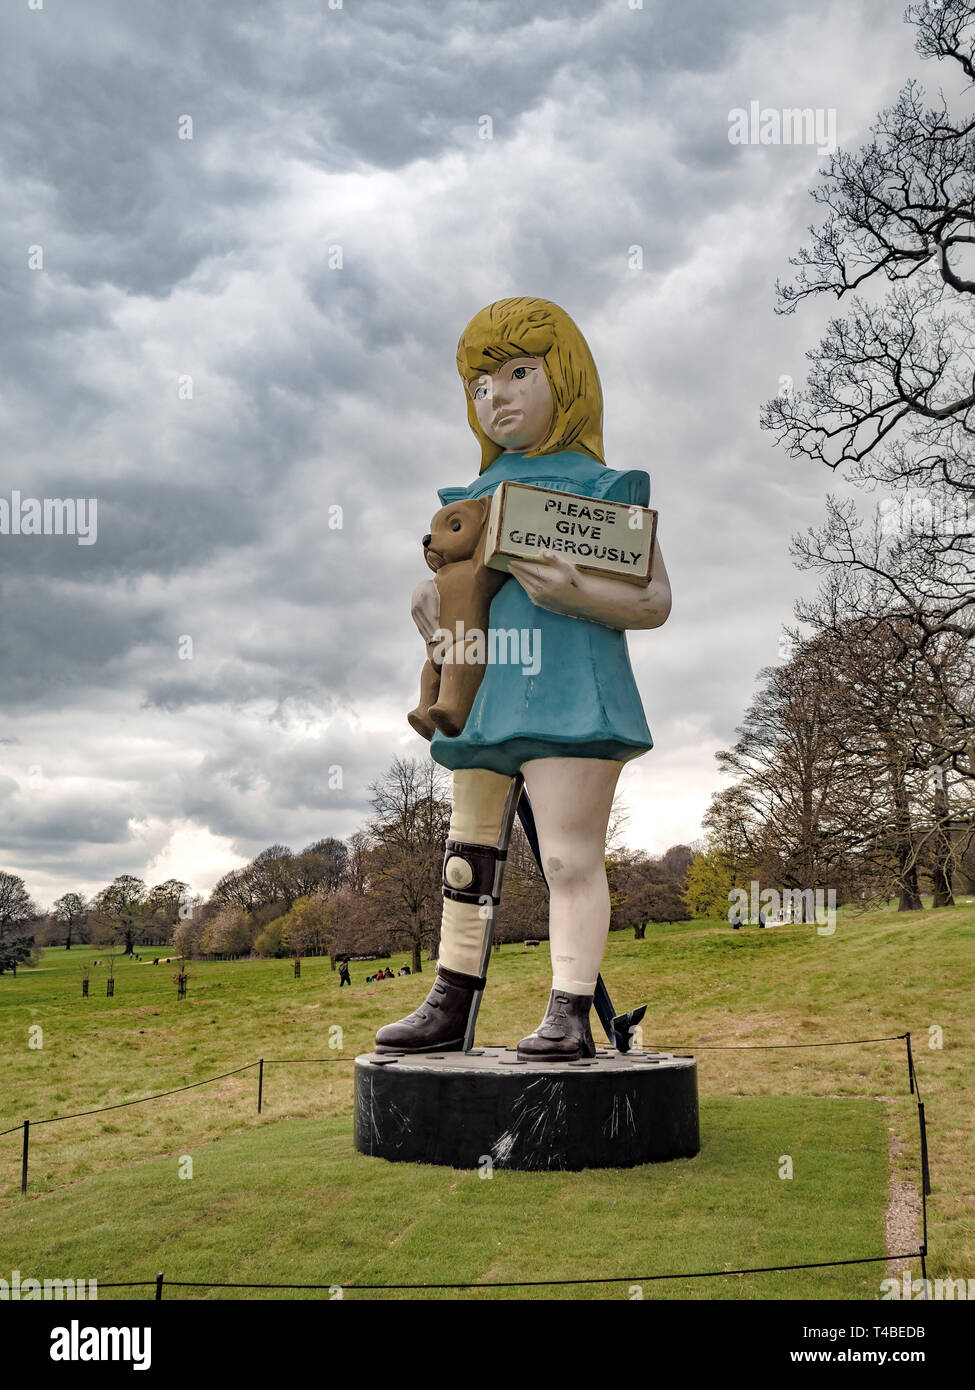 Charity, Sculpture by Damien Hirst at Yorkshire Sculpture Park, UK Stock  Photo - Alamy